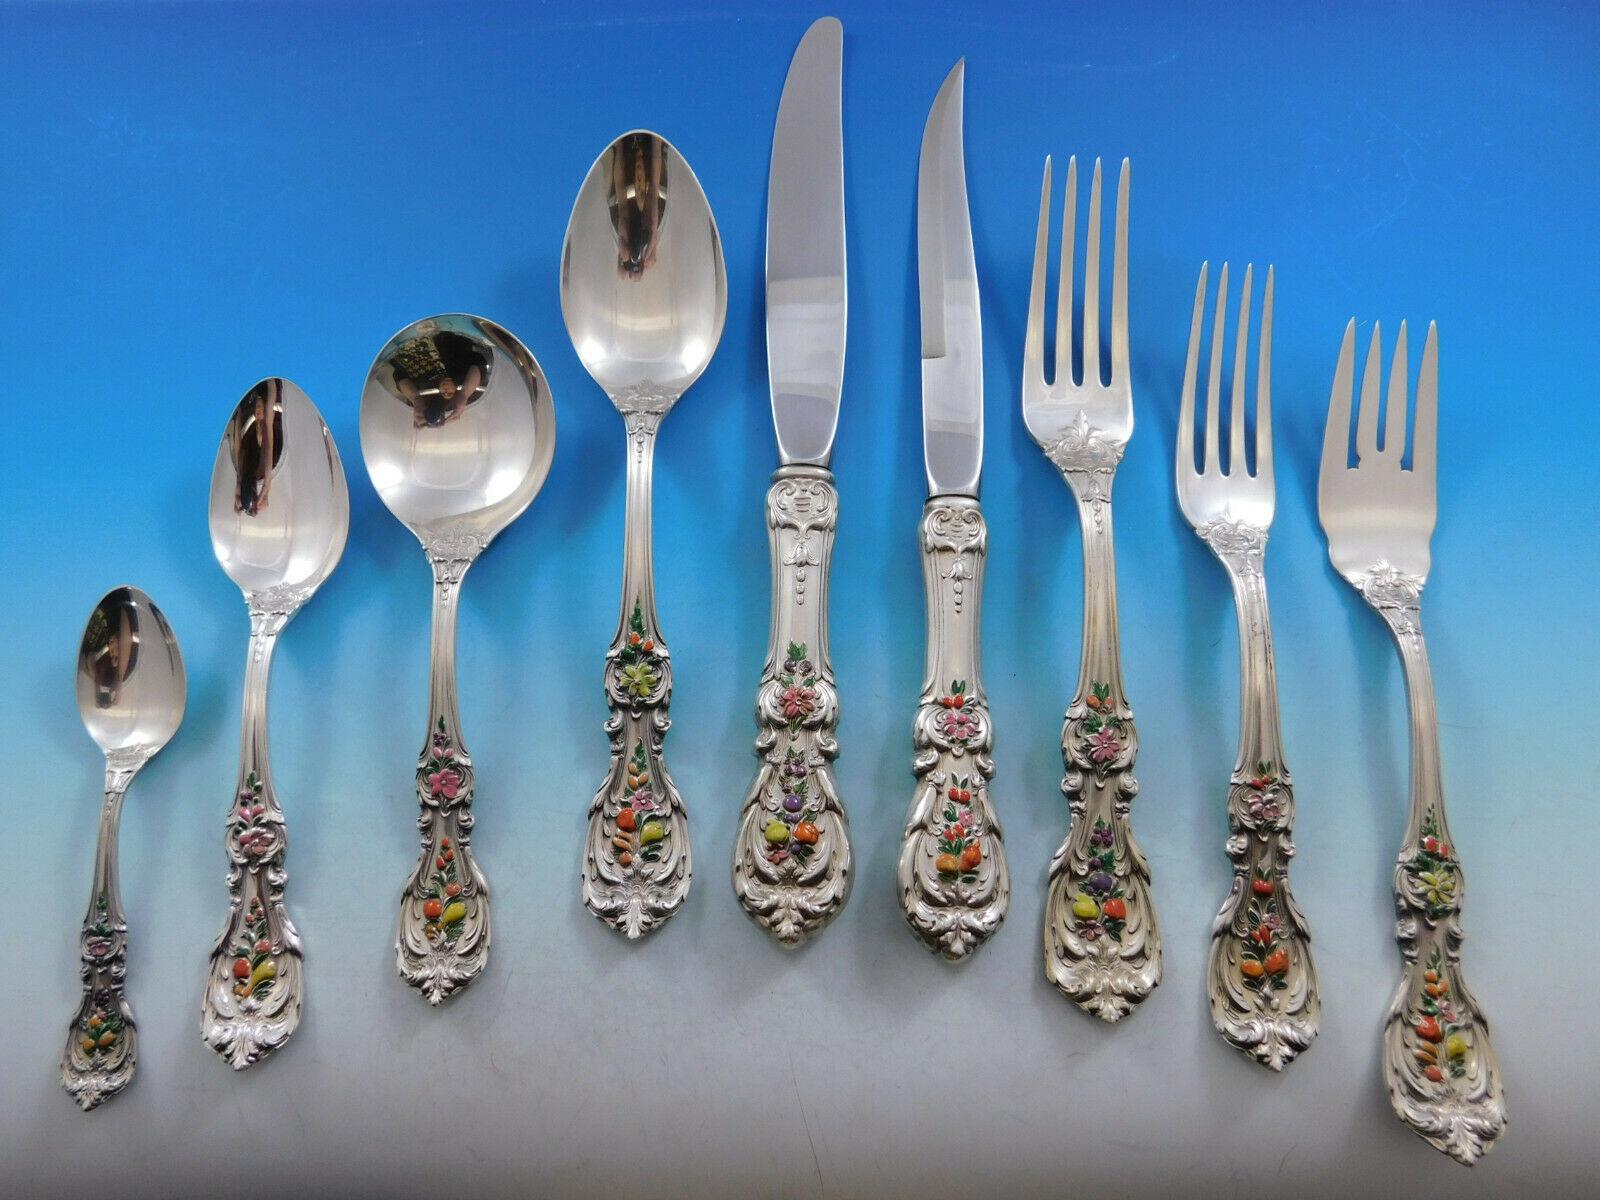 Monumental rare enameled dinner size Francis I by Reed & Barton Sterling silver flatware set, 119 pieces. The fruit and flowers are beautifully enameled! This set includes:

12 dinner size knives, 9 1/2